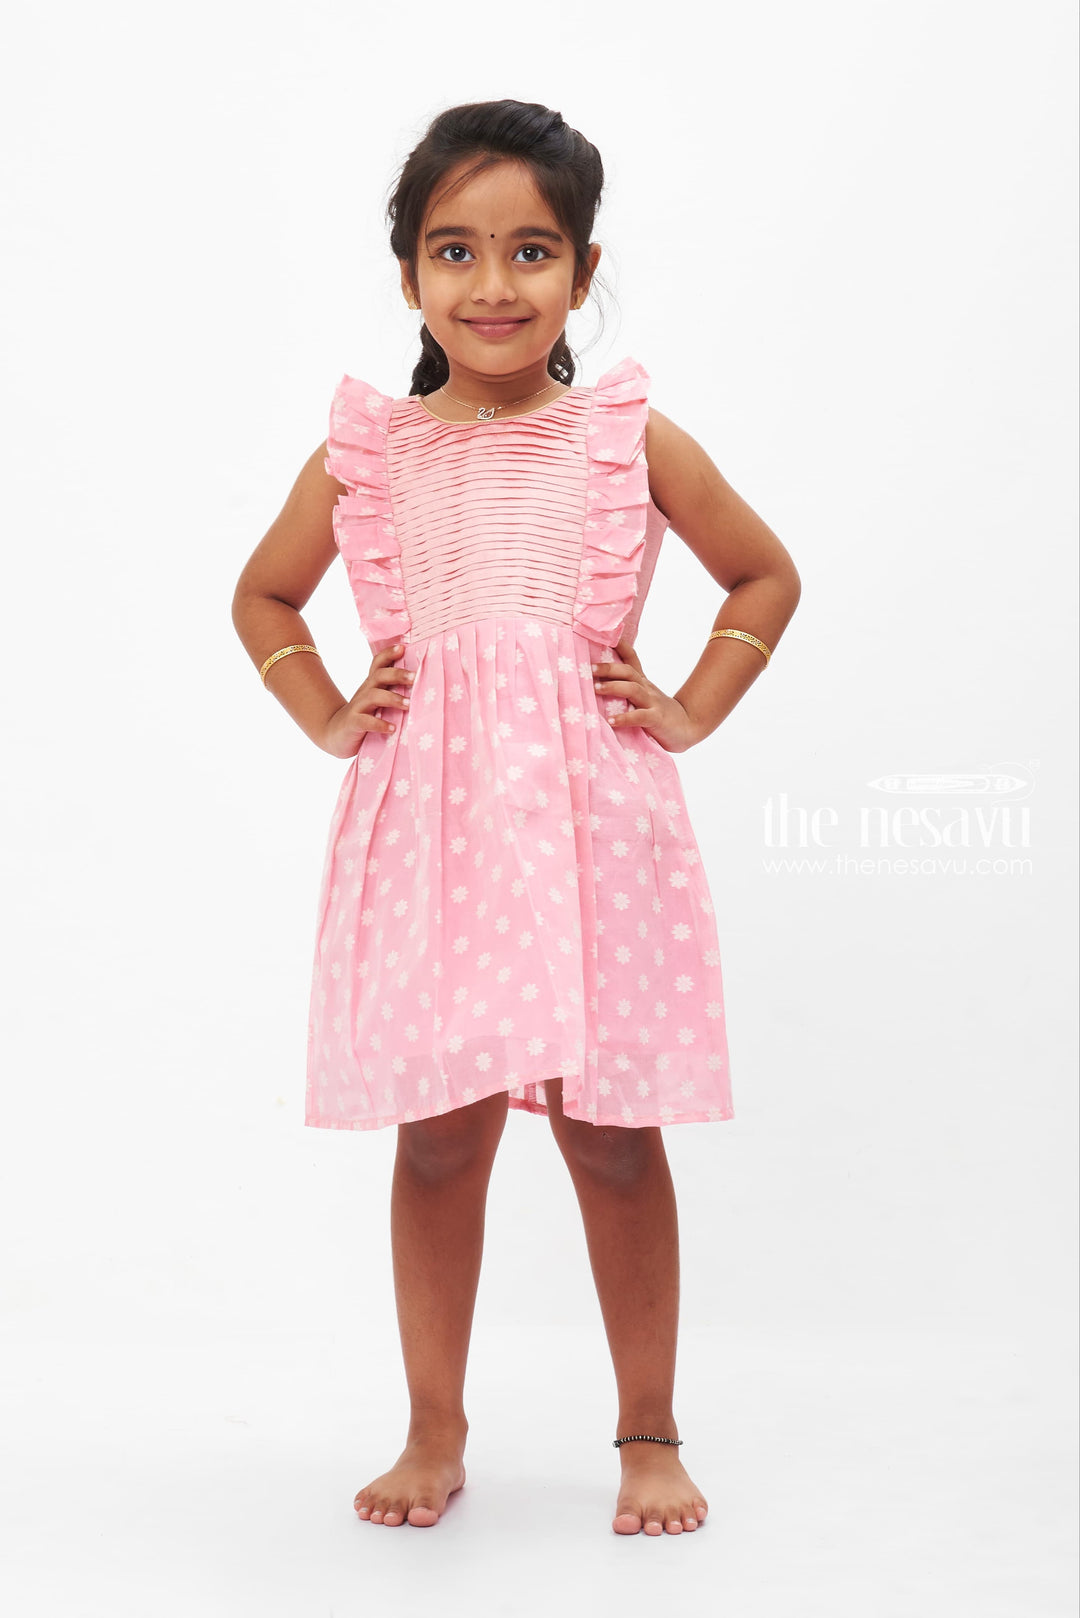 The Nesavu Baby Cotton Frocks Pretty in Pink Floral Accented Pleated Baby Frock for Girls Nesavu 16 (1Y) / Pink BFJ509A-16 Girls Pink Pleated Floral Dress | Delicate Summer Style | The Nesavu